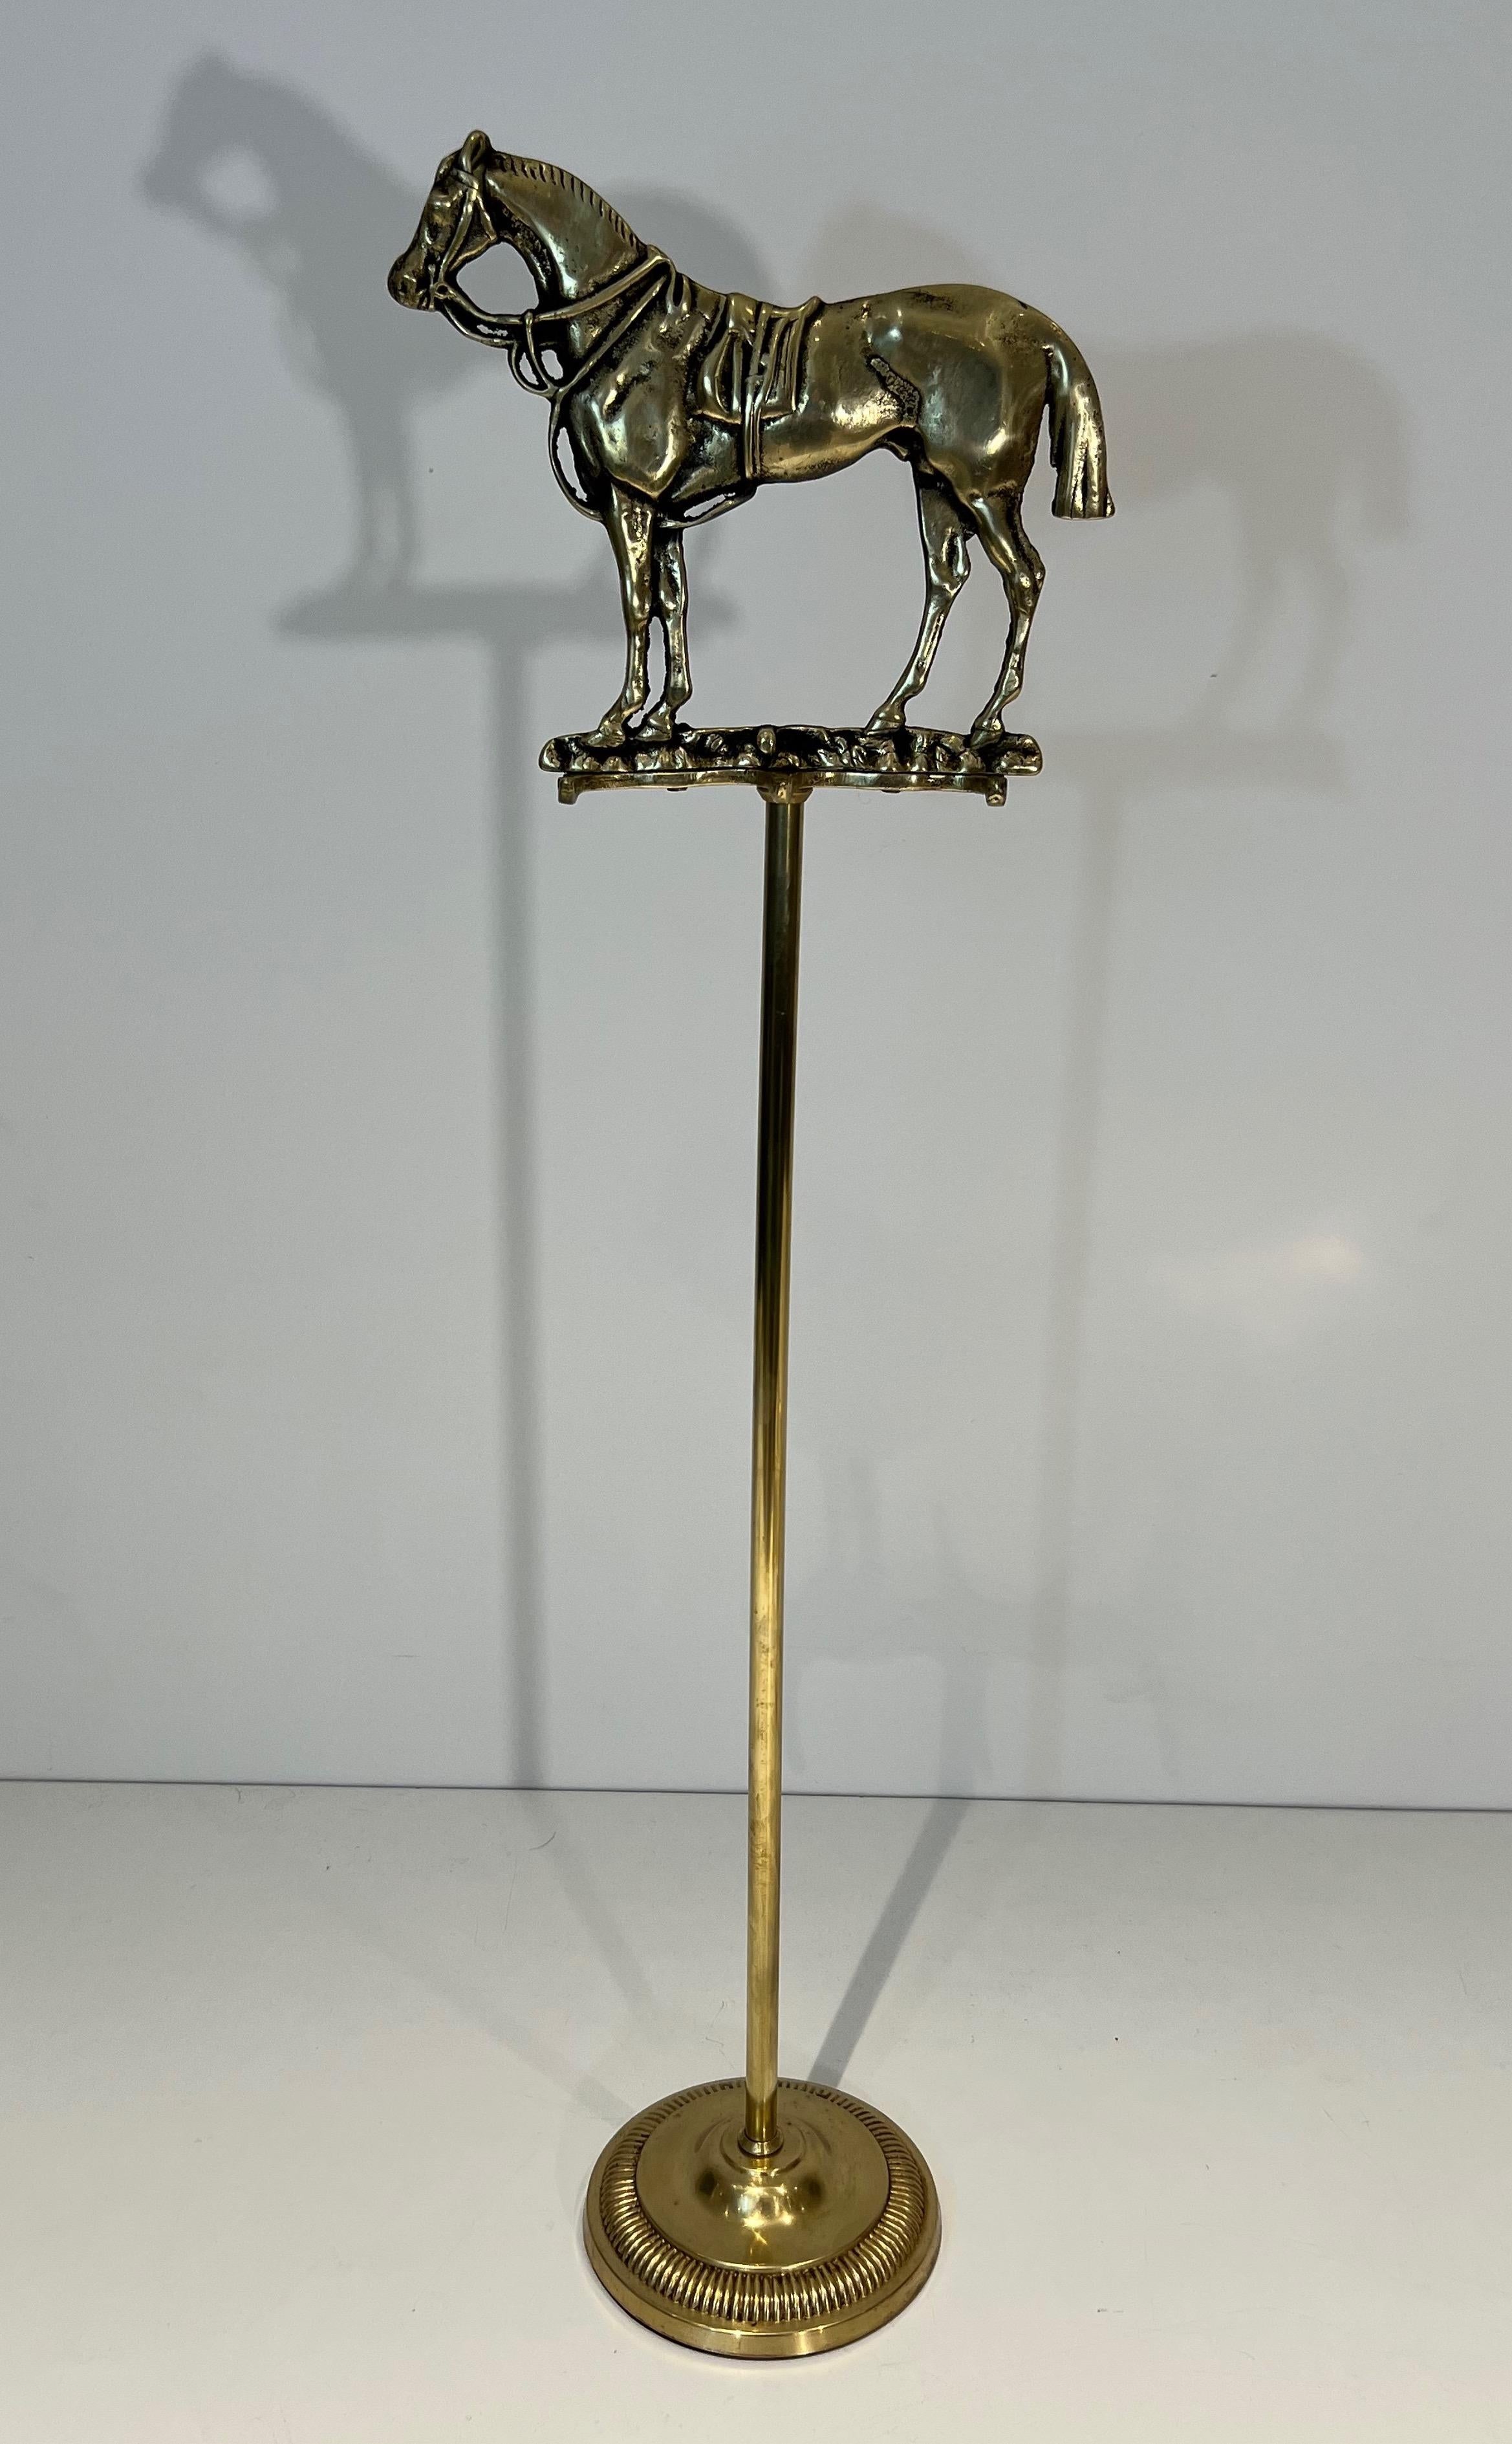 Rare Brass Fireplace Tools Surmounted by a Sculpture representing a Horse For Sale 1